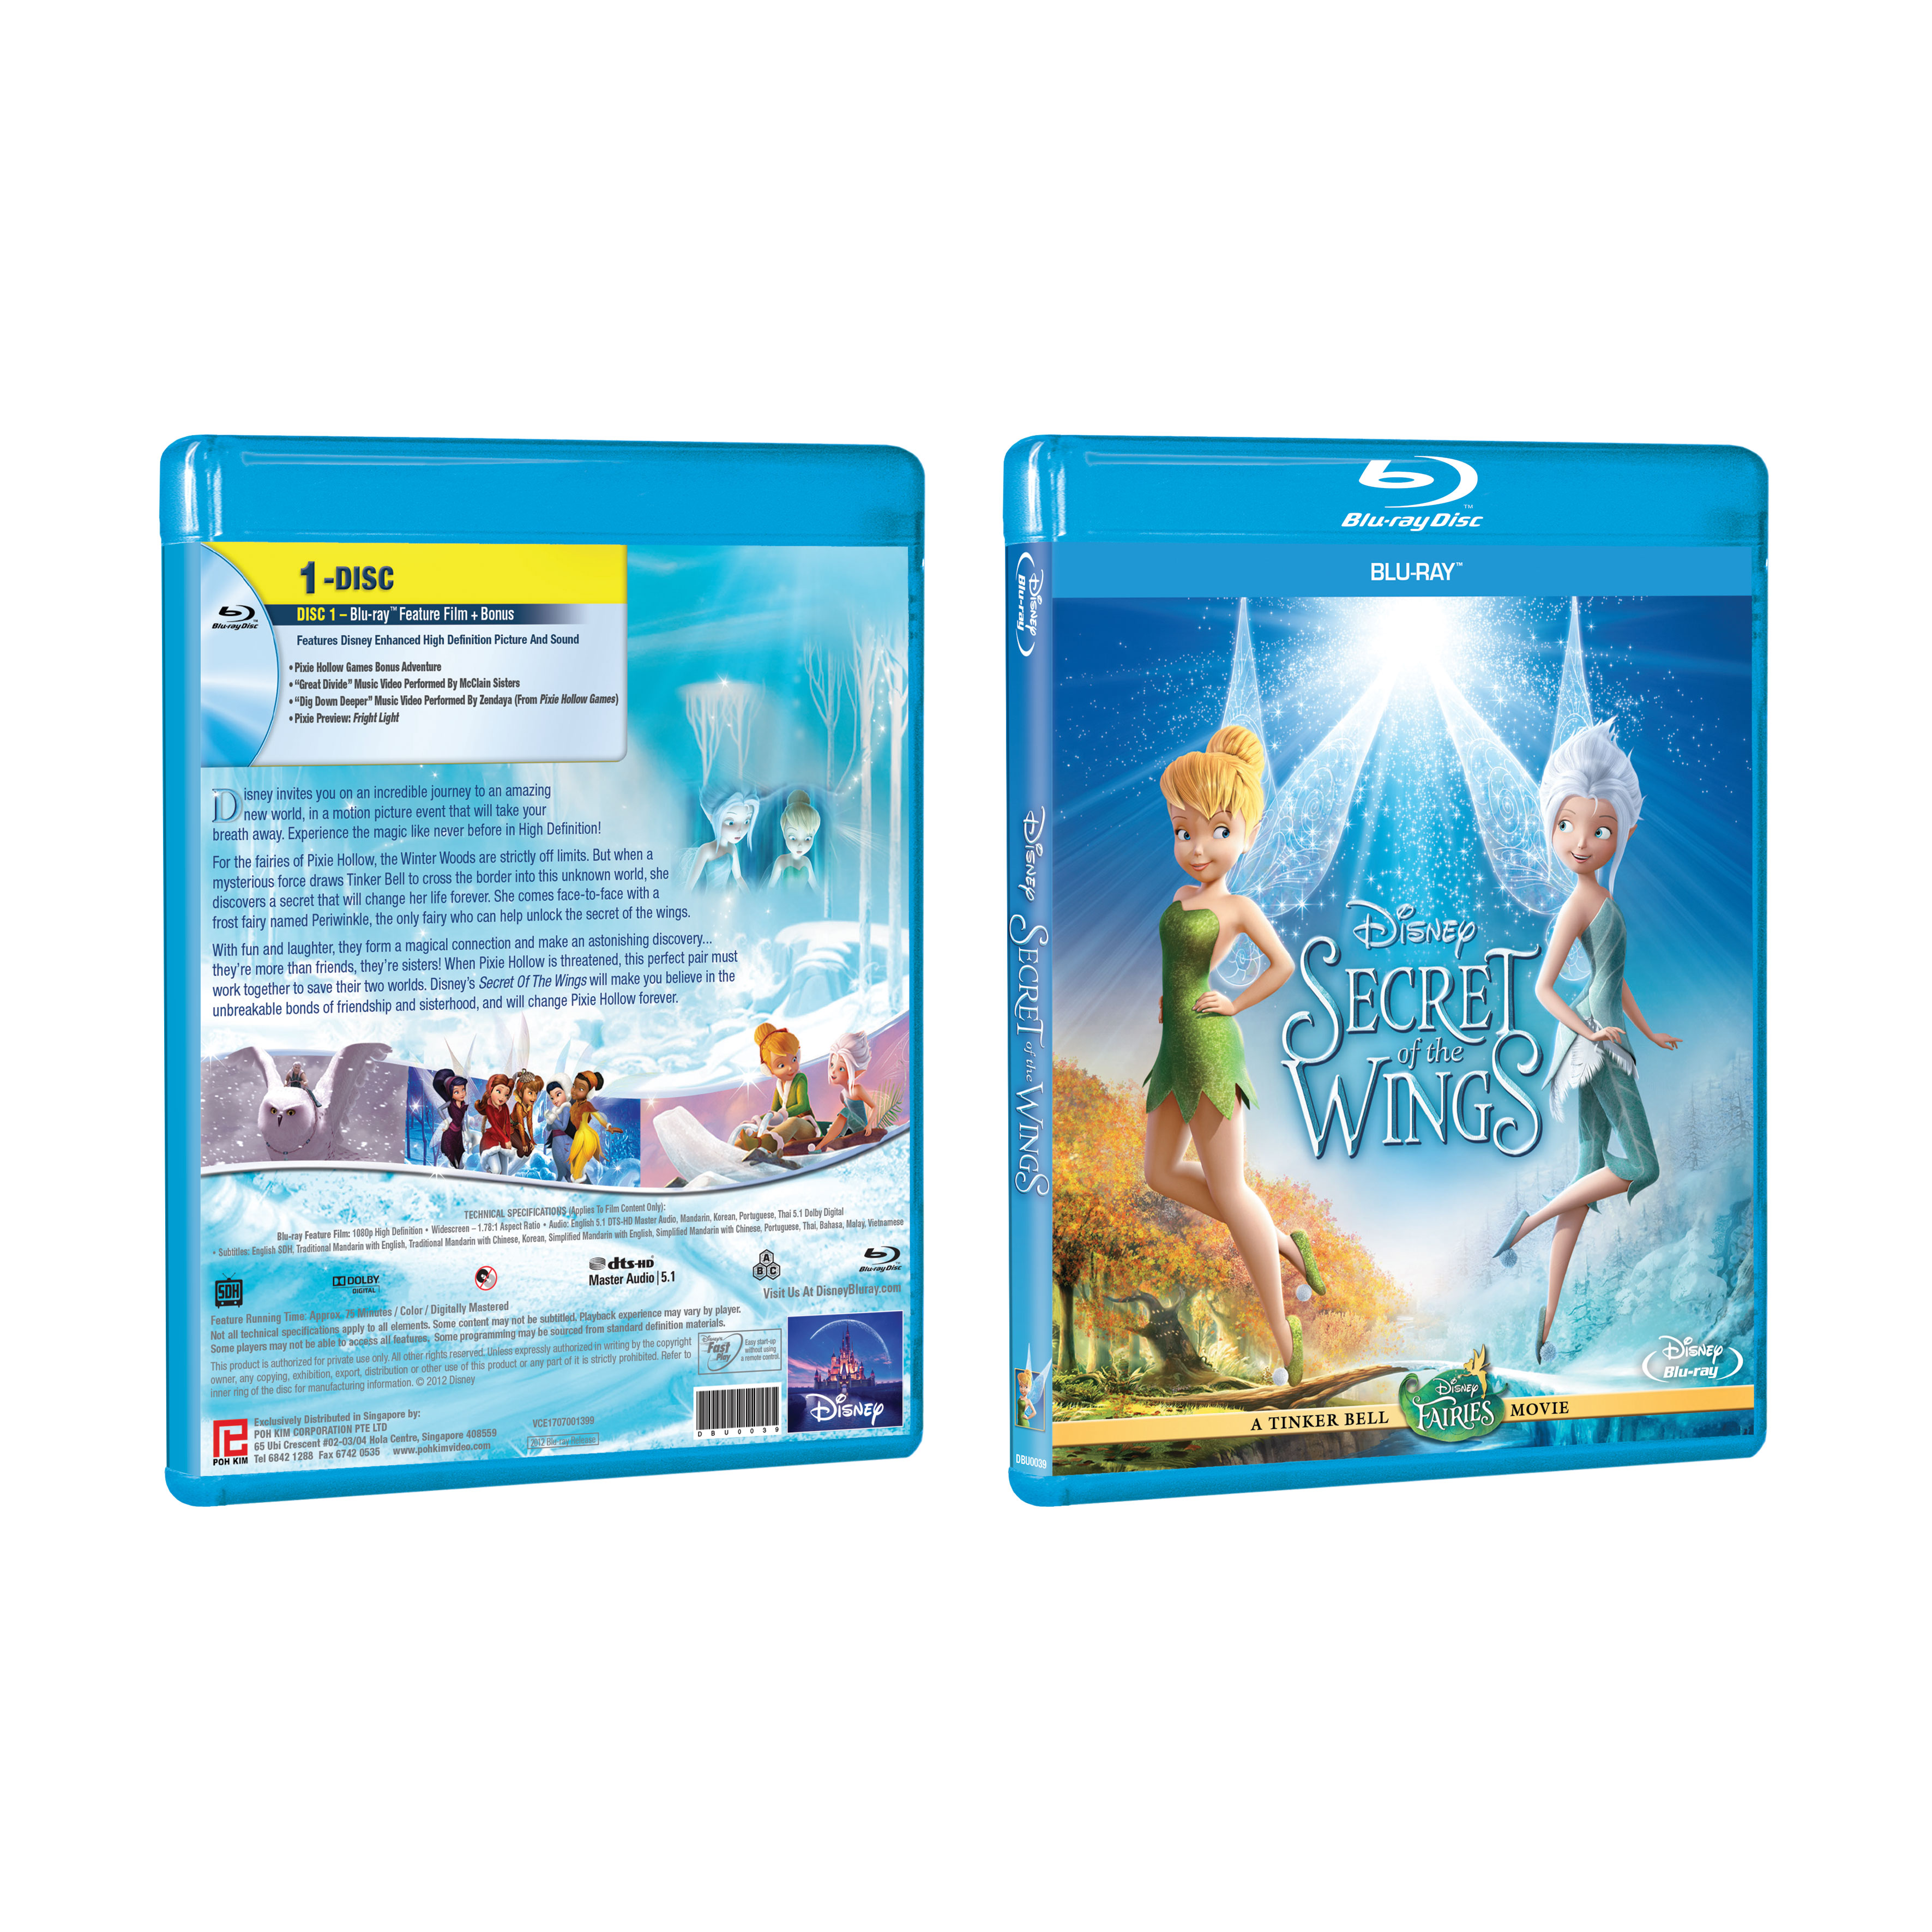 where can i buy tinkerbell secret of the wings dvd